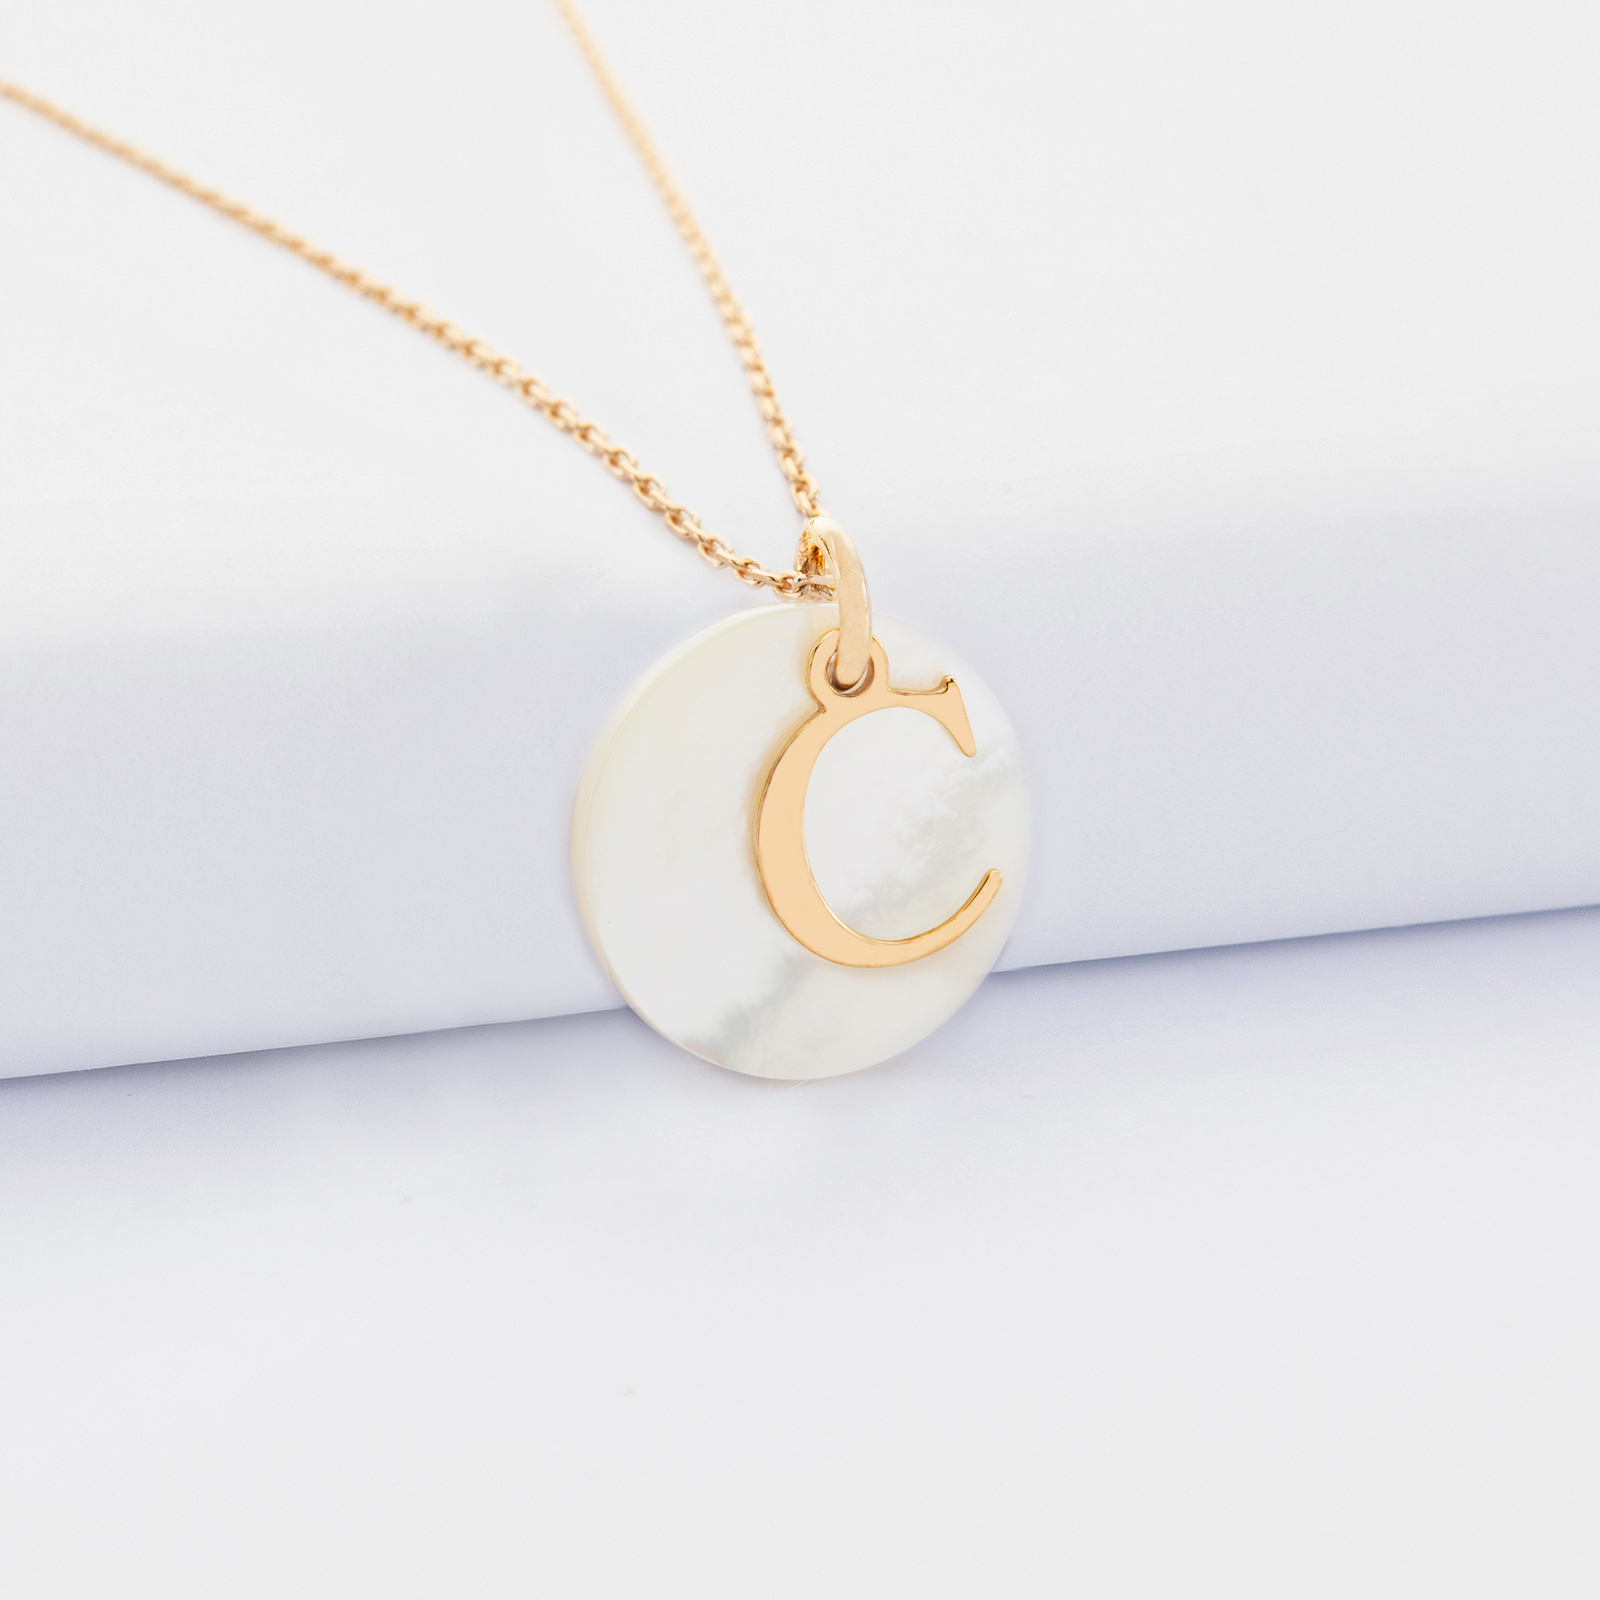 Personalised pendant with gold initial letter medaillon 14 mm and mother of pearl charm 19 mm